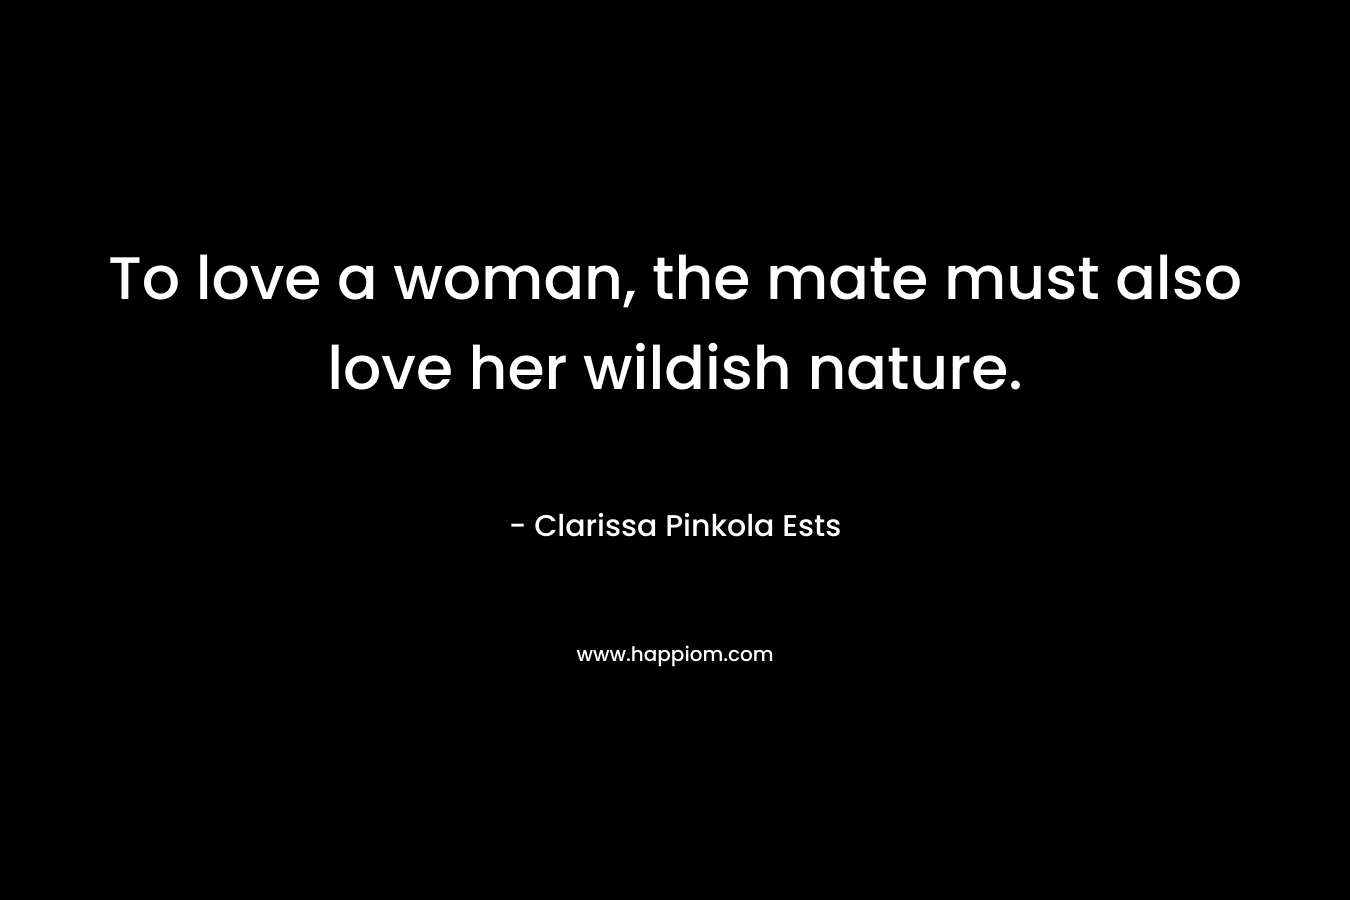 To love a woman, the mate must also love her wildish nature. – Clarissa Pinkola Ests